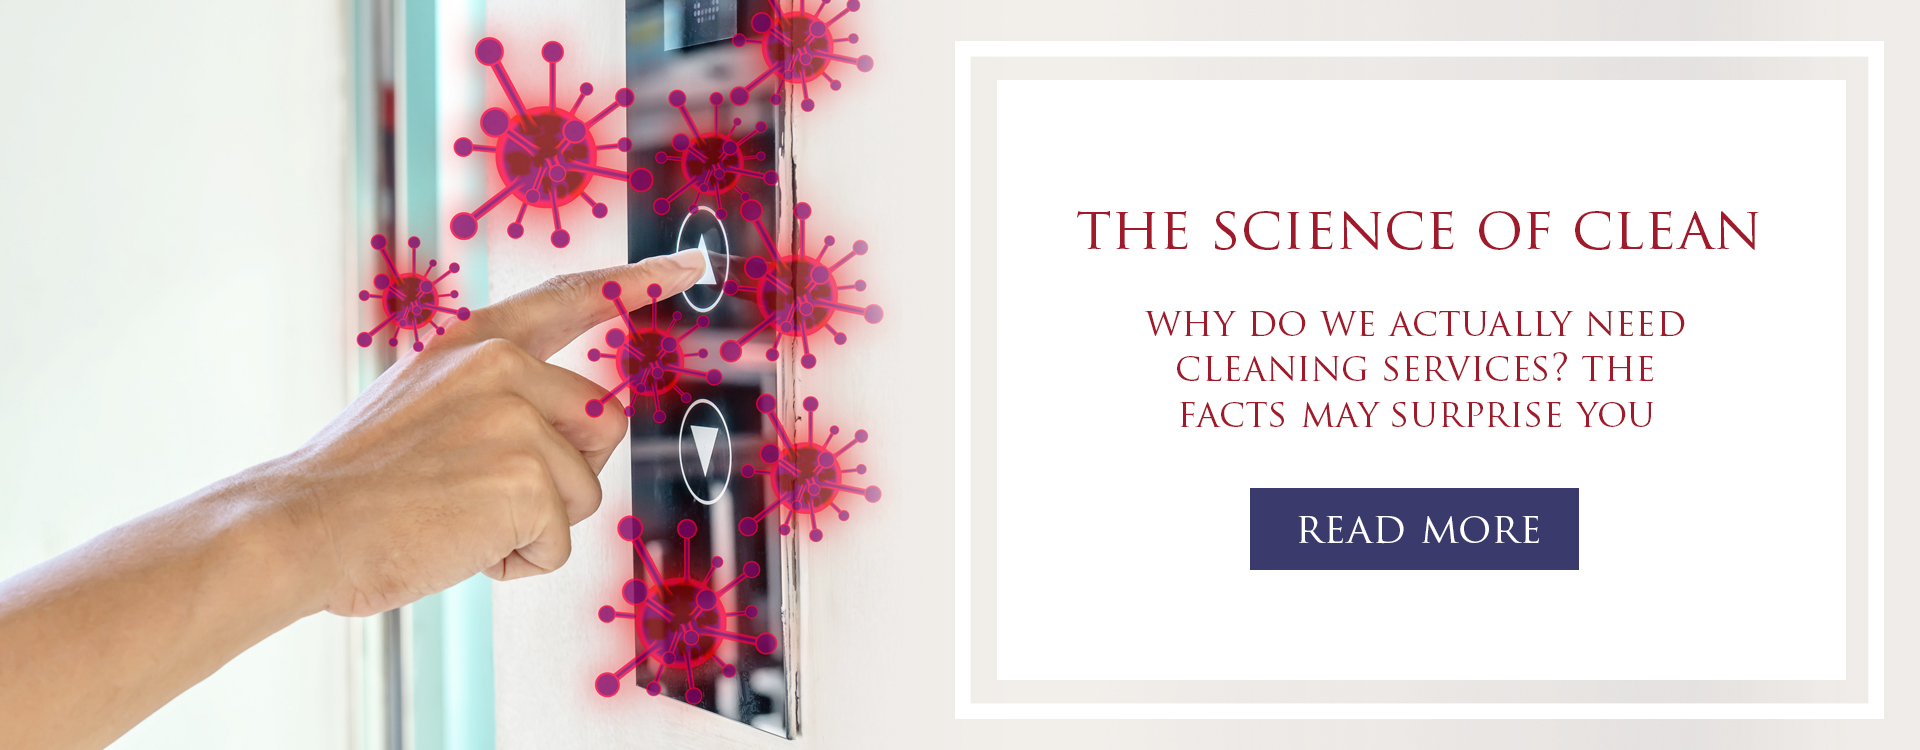 Why do we actually need cleaning services? The facts may surprise you!